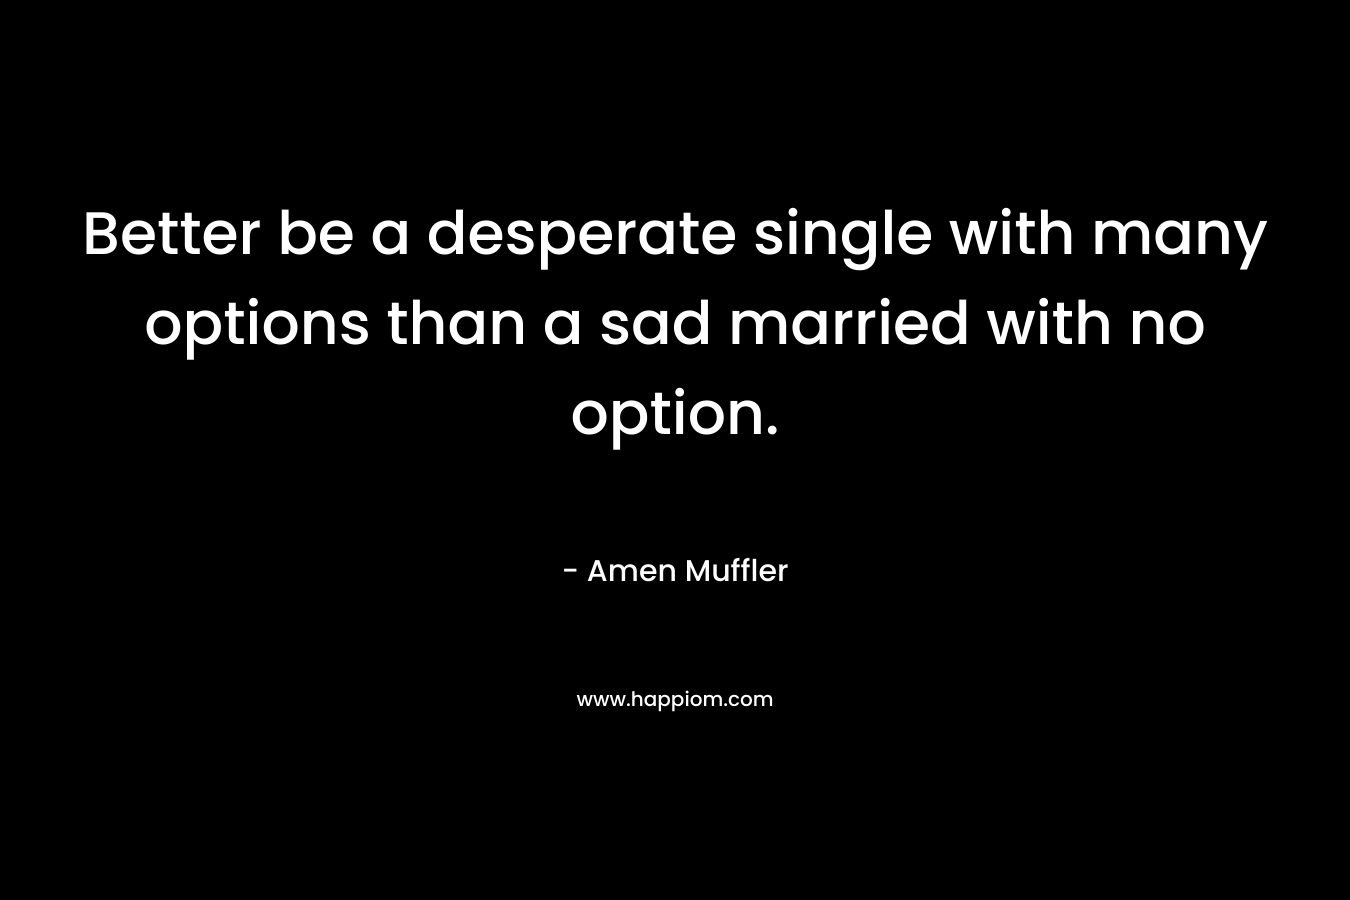 Better be a desperate single with many options than a sad married with no option.